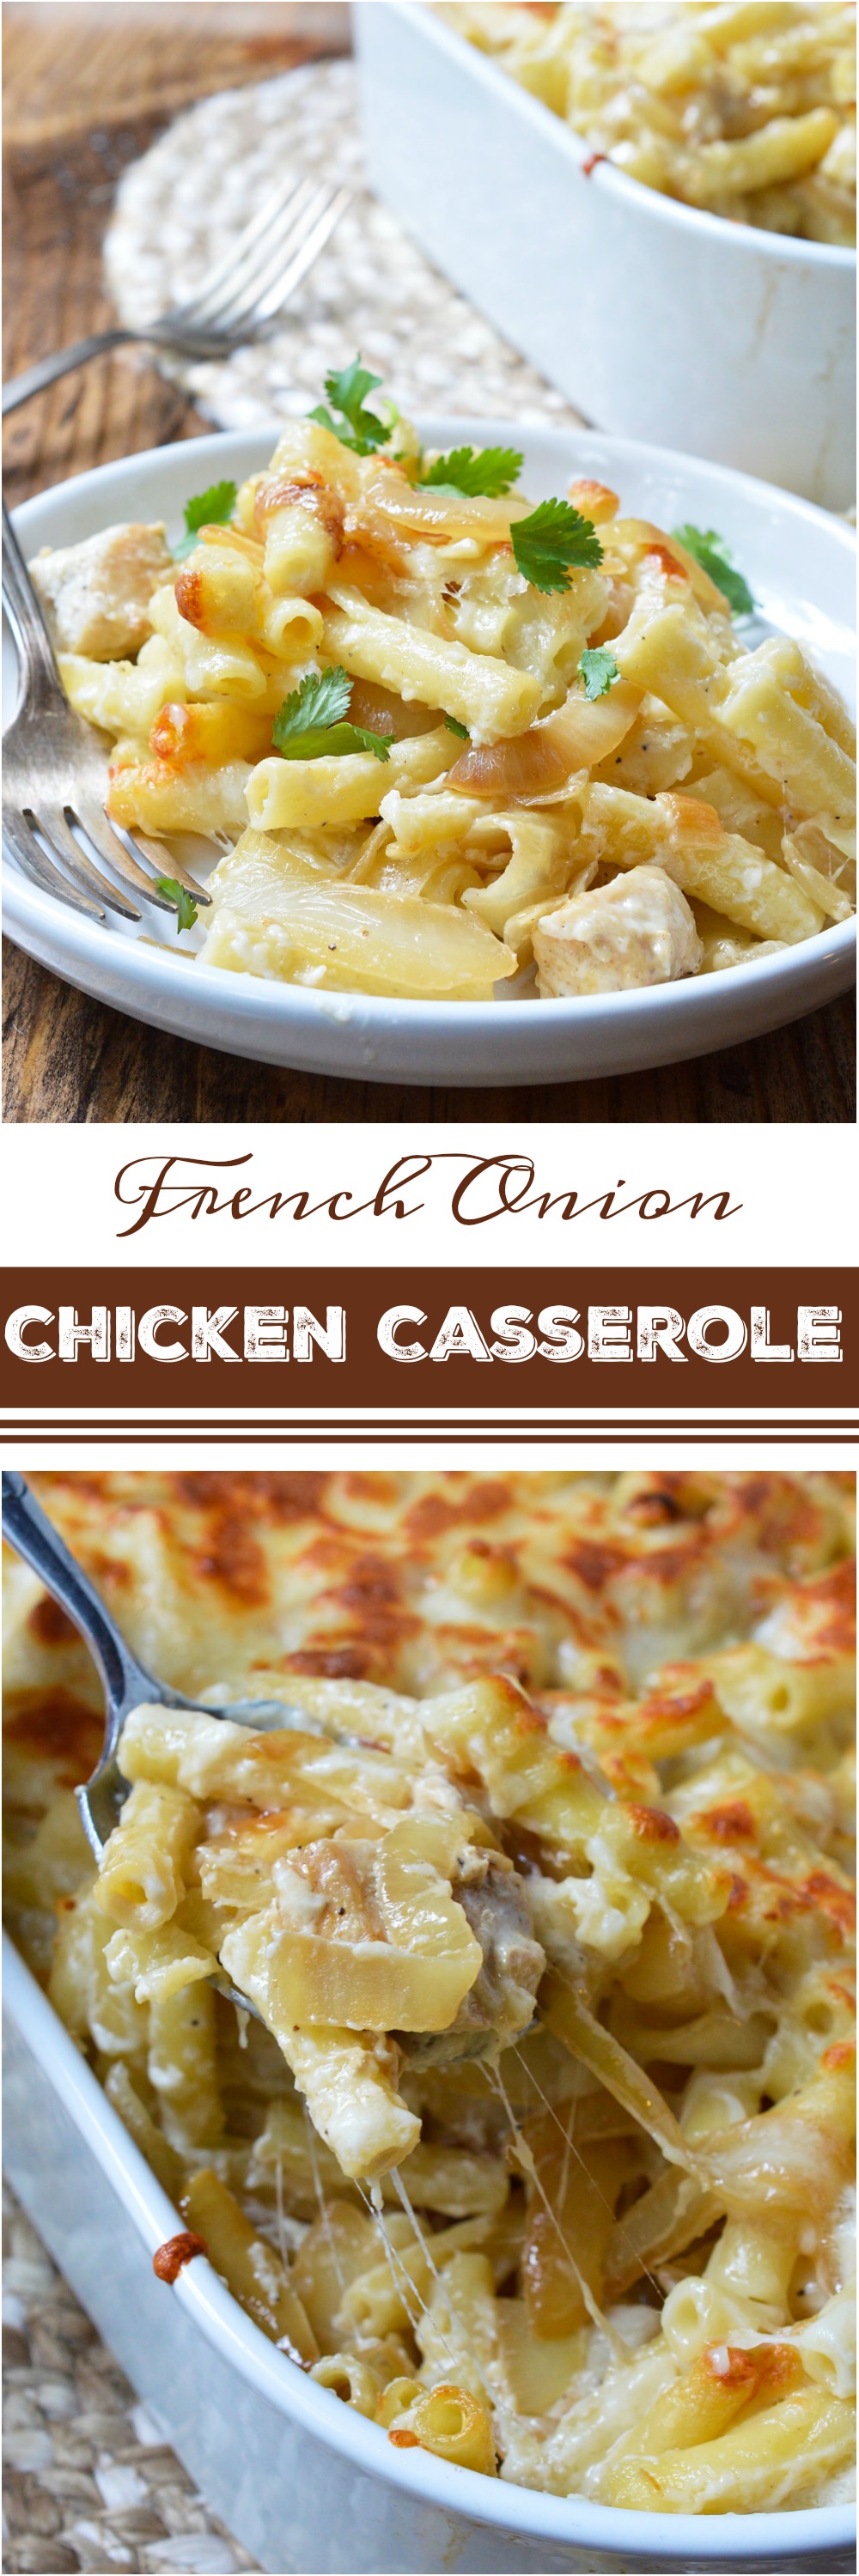 French Onion Chicken Casserole with Green Beans No Cream Soup!